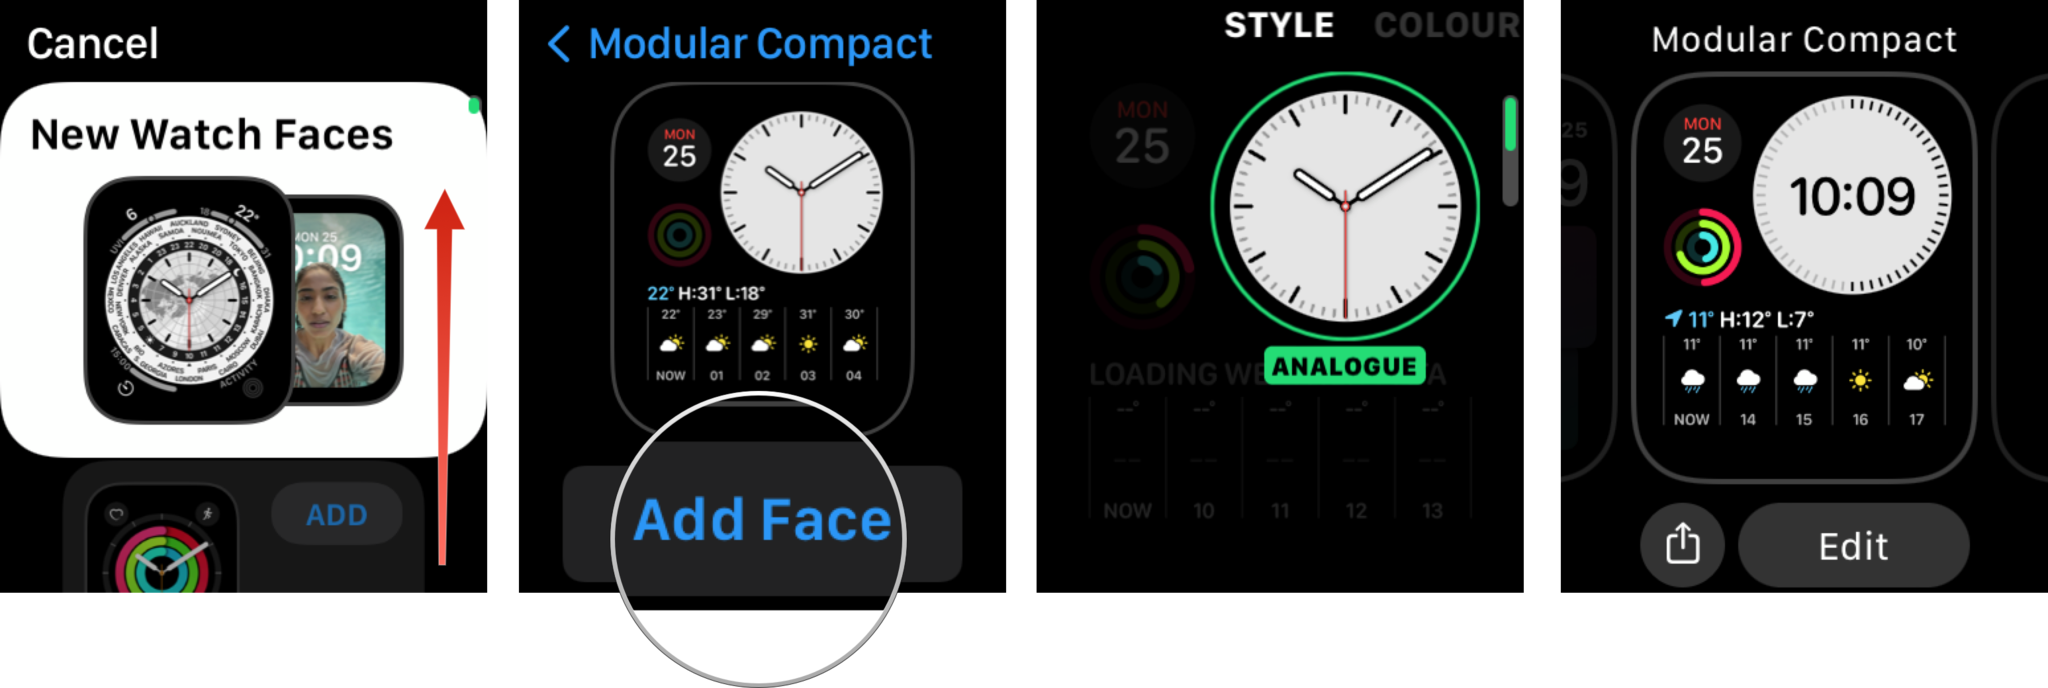 Add Watch Face via Apple Watch: Swipe up or down or scroll using the Digital Crown, tap on the watch face you want to use and tap Add Face, customize complications and colors, press the Digital Crown to confirm changes and add the watch face